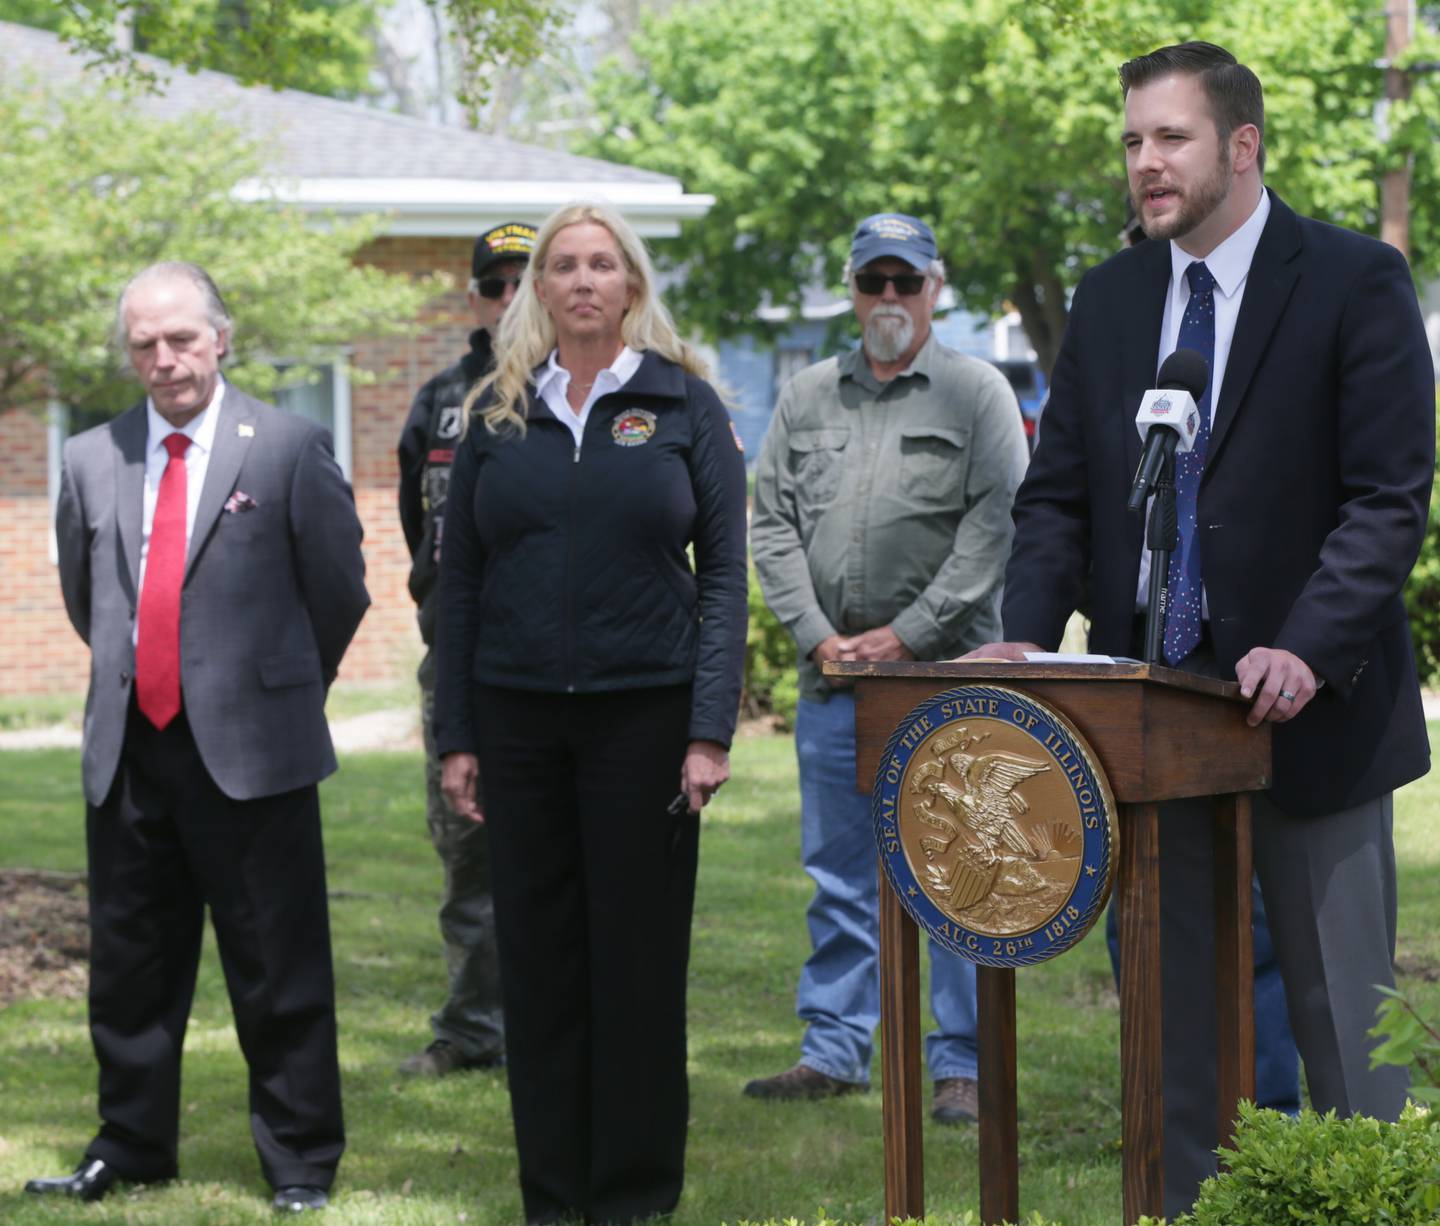 State Rep. David Welter R-Morris  speaks with other state senators Craig Wilcox, R-McHenry, and Sue Rezin, R-Morris, at the Illinois Veterans Home in La Salle on Monday May 6, 2021.